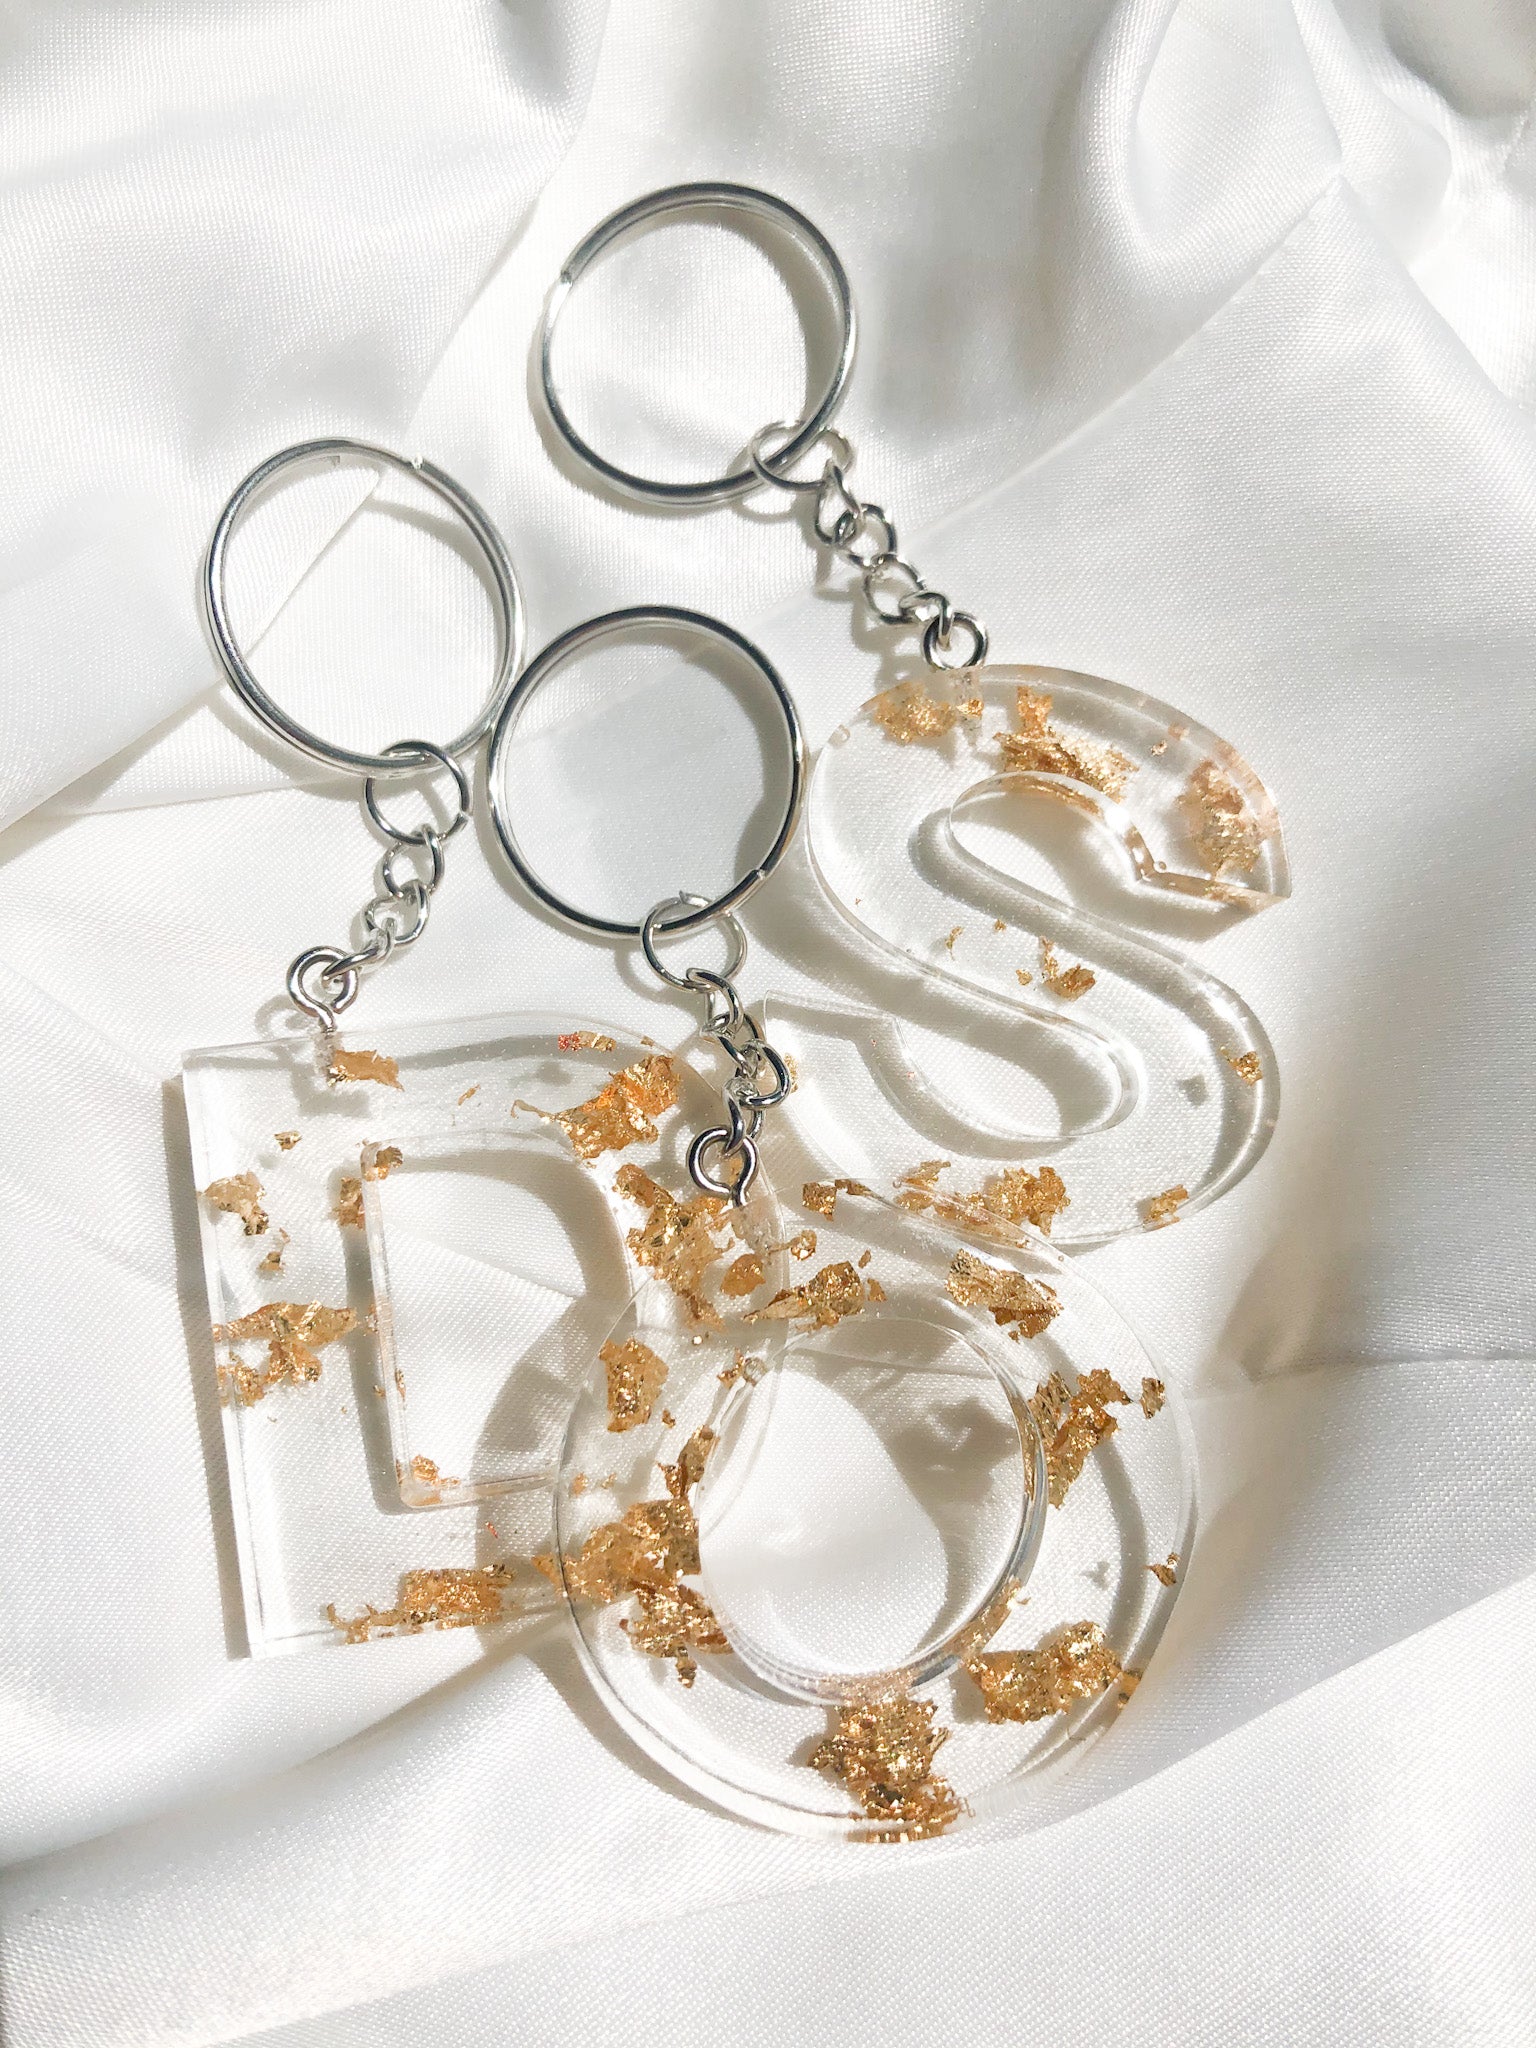 clear resin letter keychains with gold foil inside and silver chain